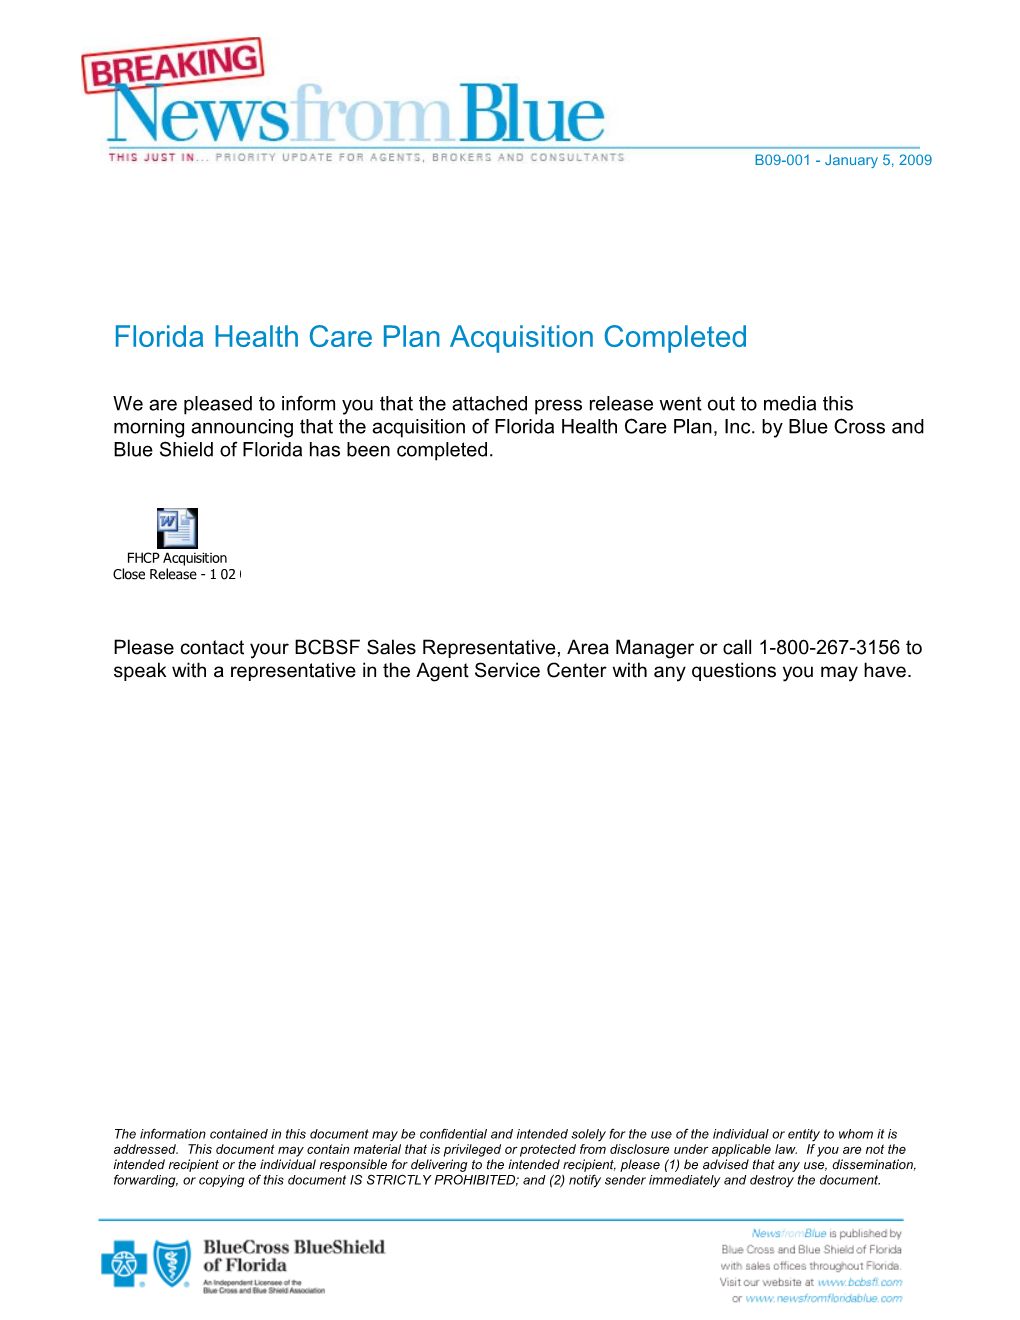 Florida Health Care Plan Acquisition Completed We Are Pleased to Inform You That the Attached